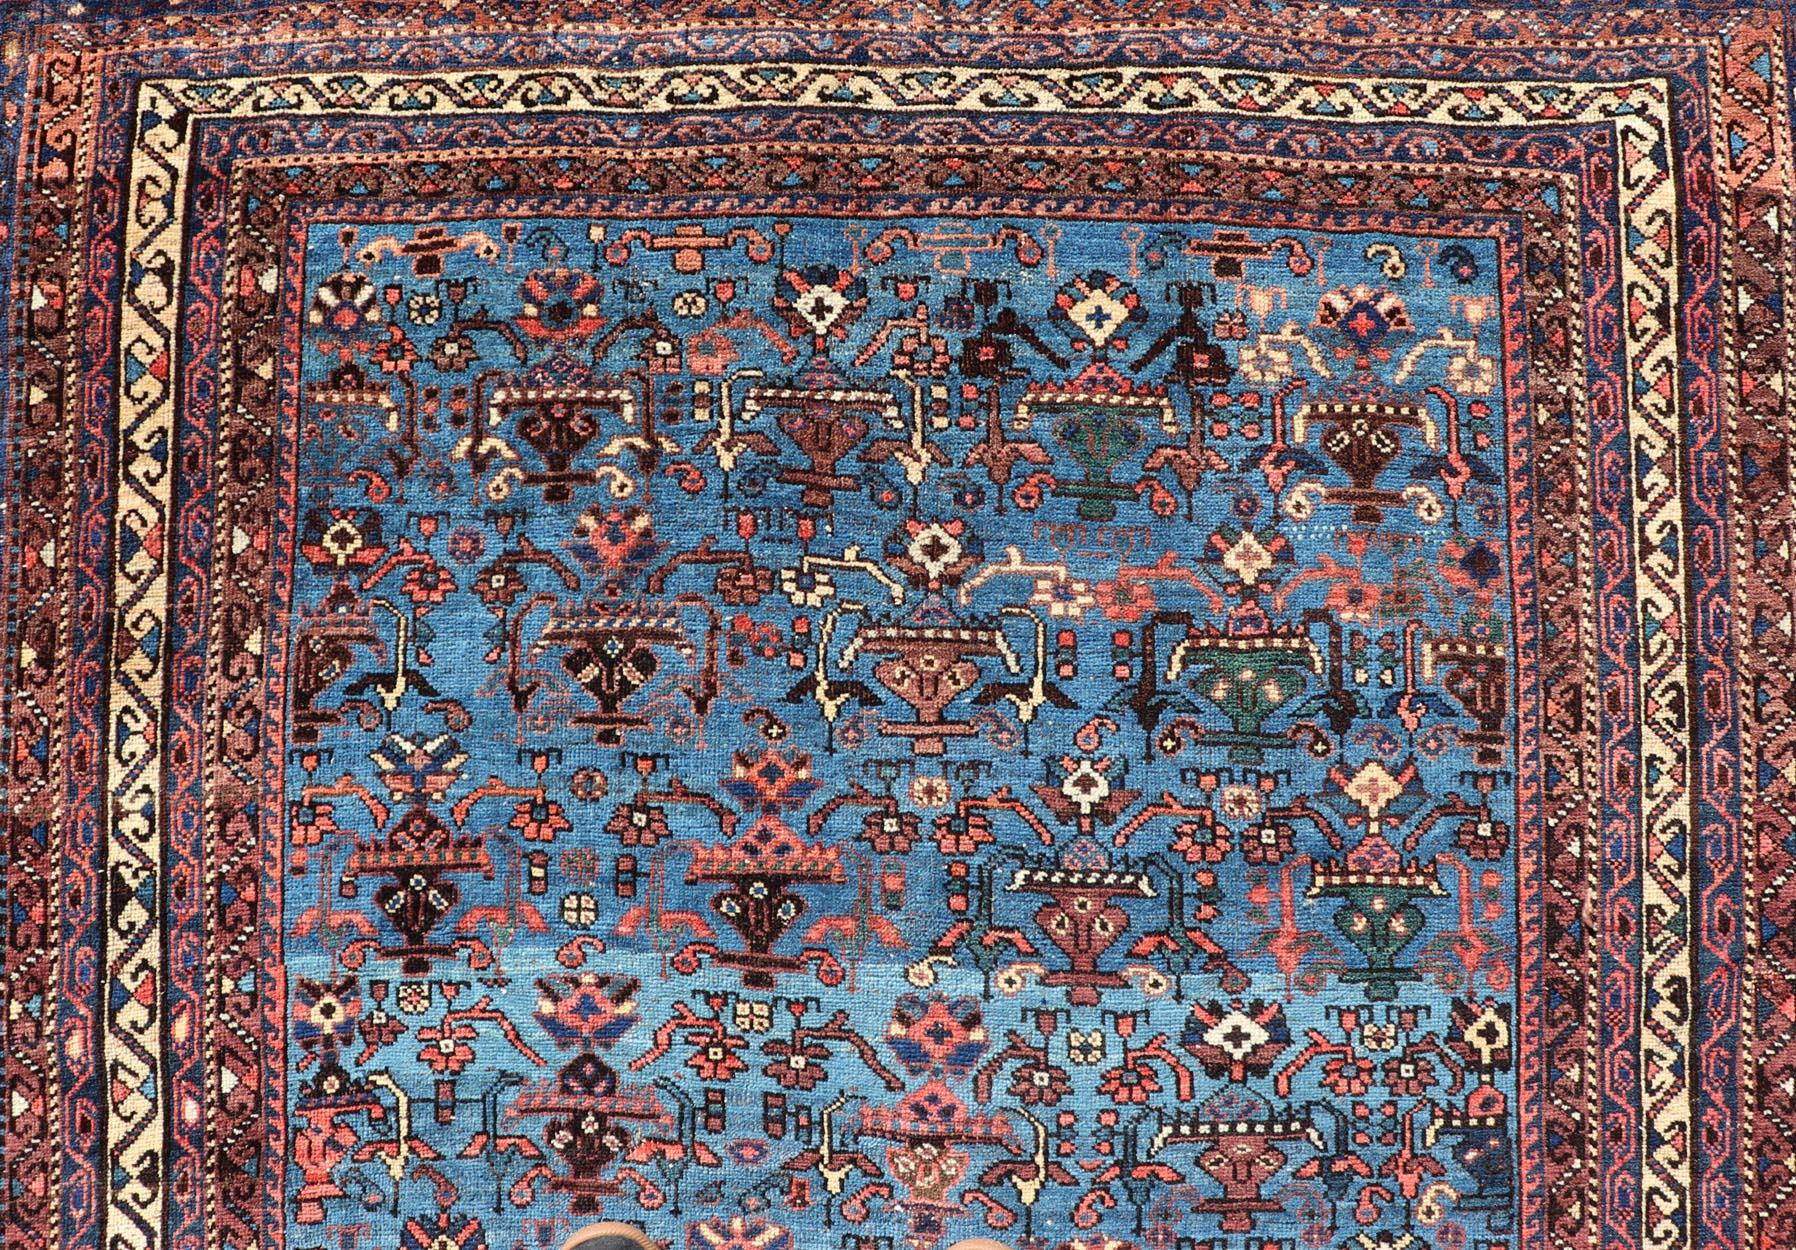 Persian Antique Afshar Rug in unique Blue tones in the Background and All-Over Small Tribal Motifs. Woven Arts / rug /EMB-22188-15101, origin/Iran, Persian Afshar rug, circa 1900's

Measures: 4'8 x 6'

Handwoven by Afshar tribal artisan in southern